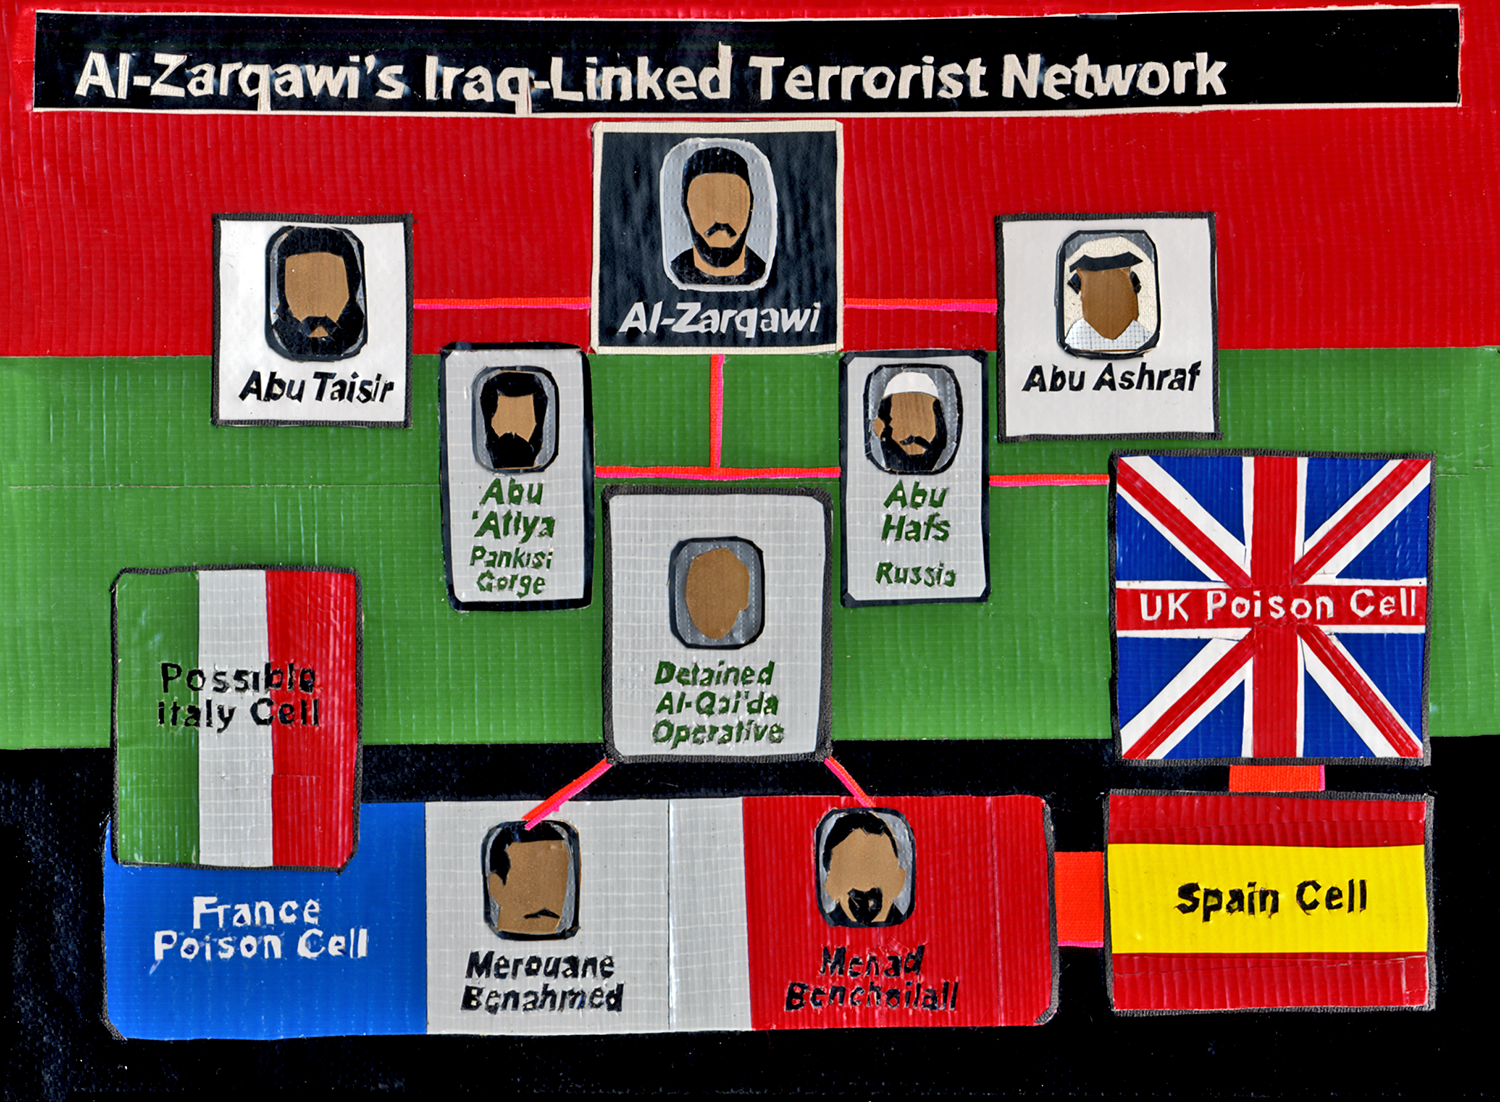 SOUTH OF 7th HEAVEN: Terrorist Network Graphic, furnished by the Associated Press